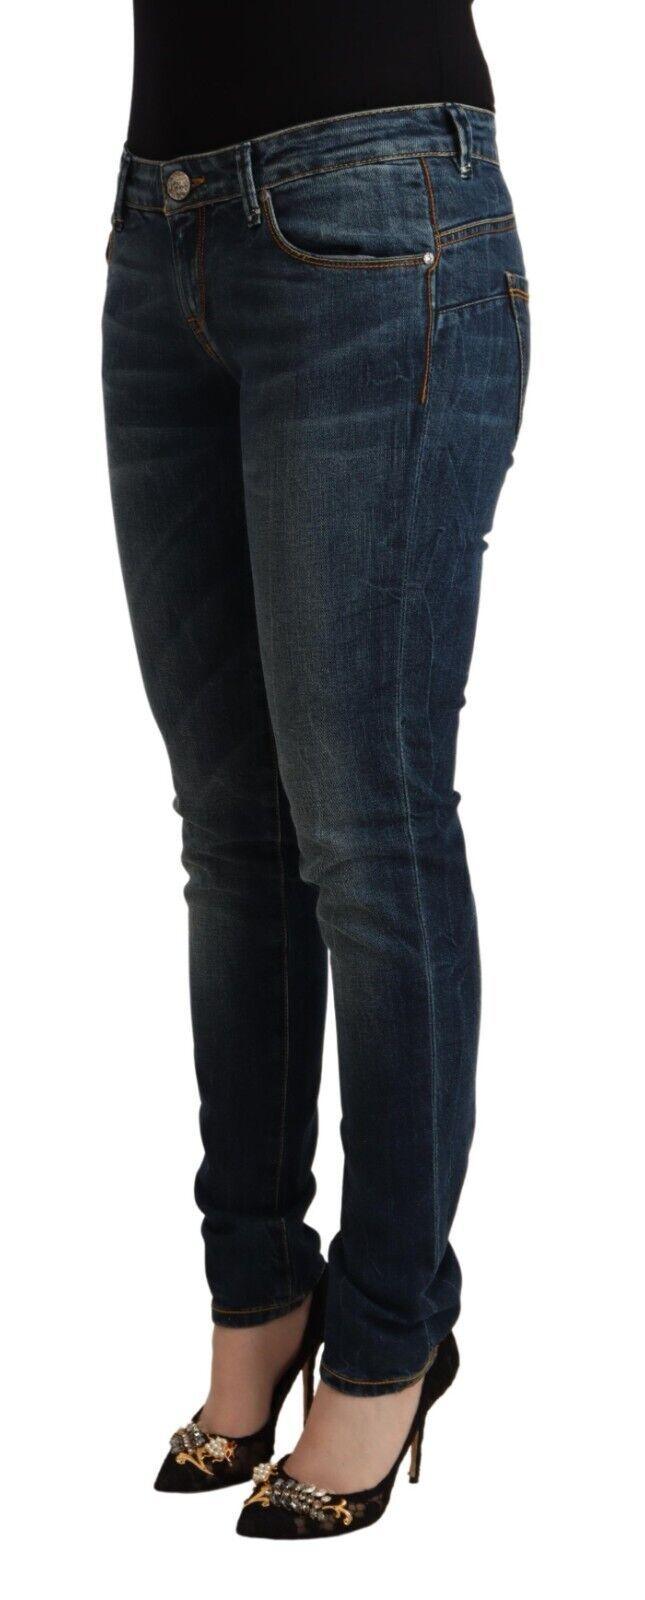 Blue Washed Cotton Low Waist Slim Fit Denim Jeans - Designed by Acht Available to Buy at a Discounted Price on Moon Behind The Hill Online Designer Discount Store